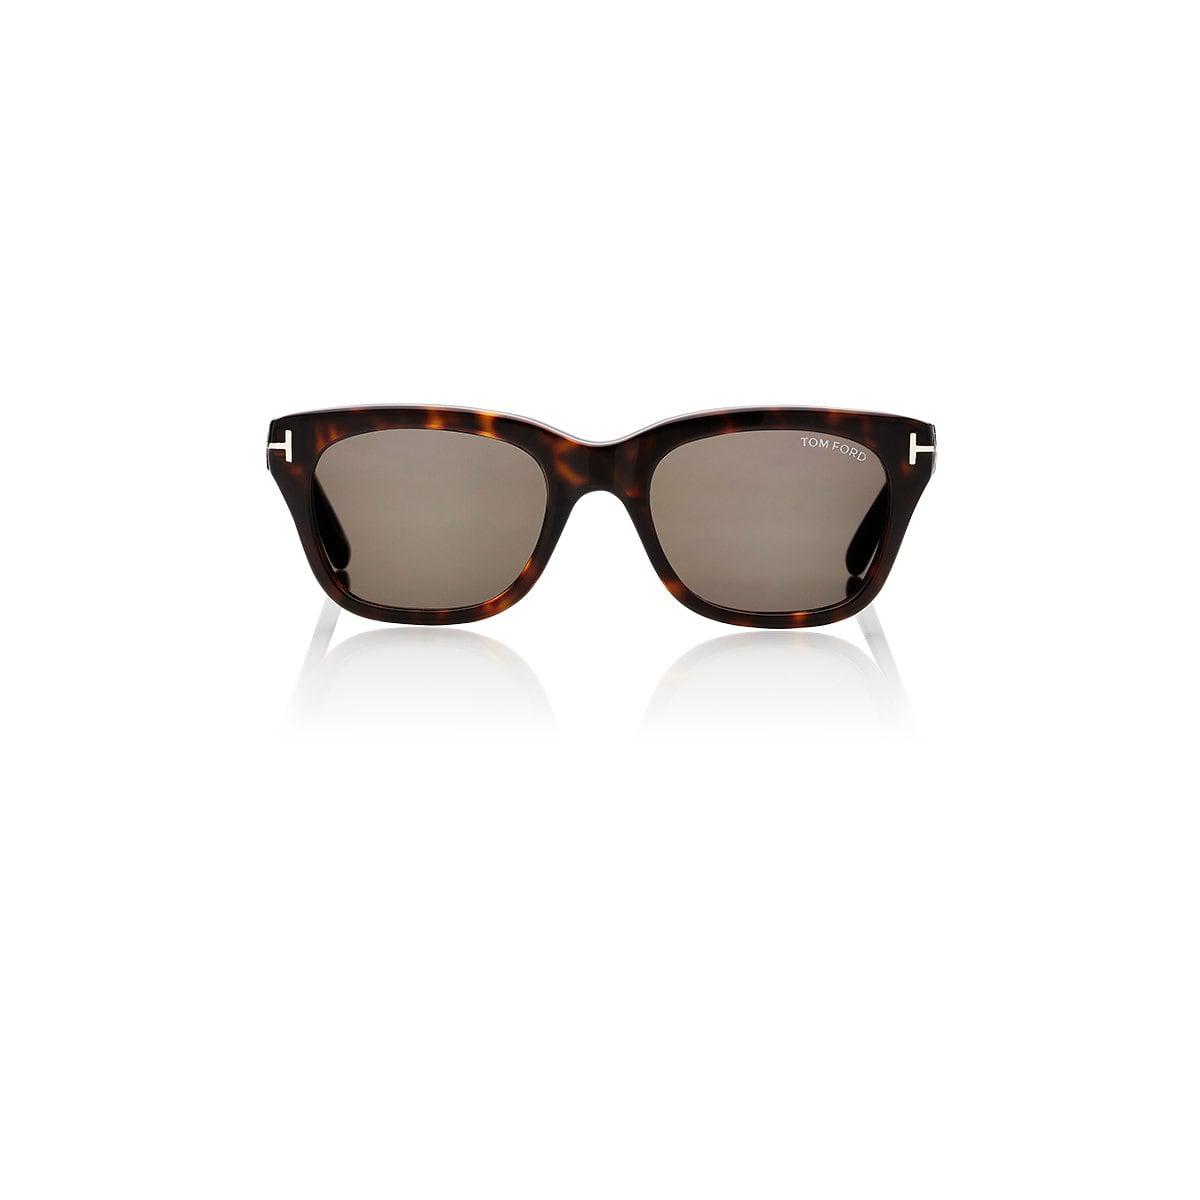 Lyst - Tom Ford Snowdon Sunglasses in Brown for Men